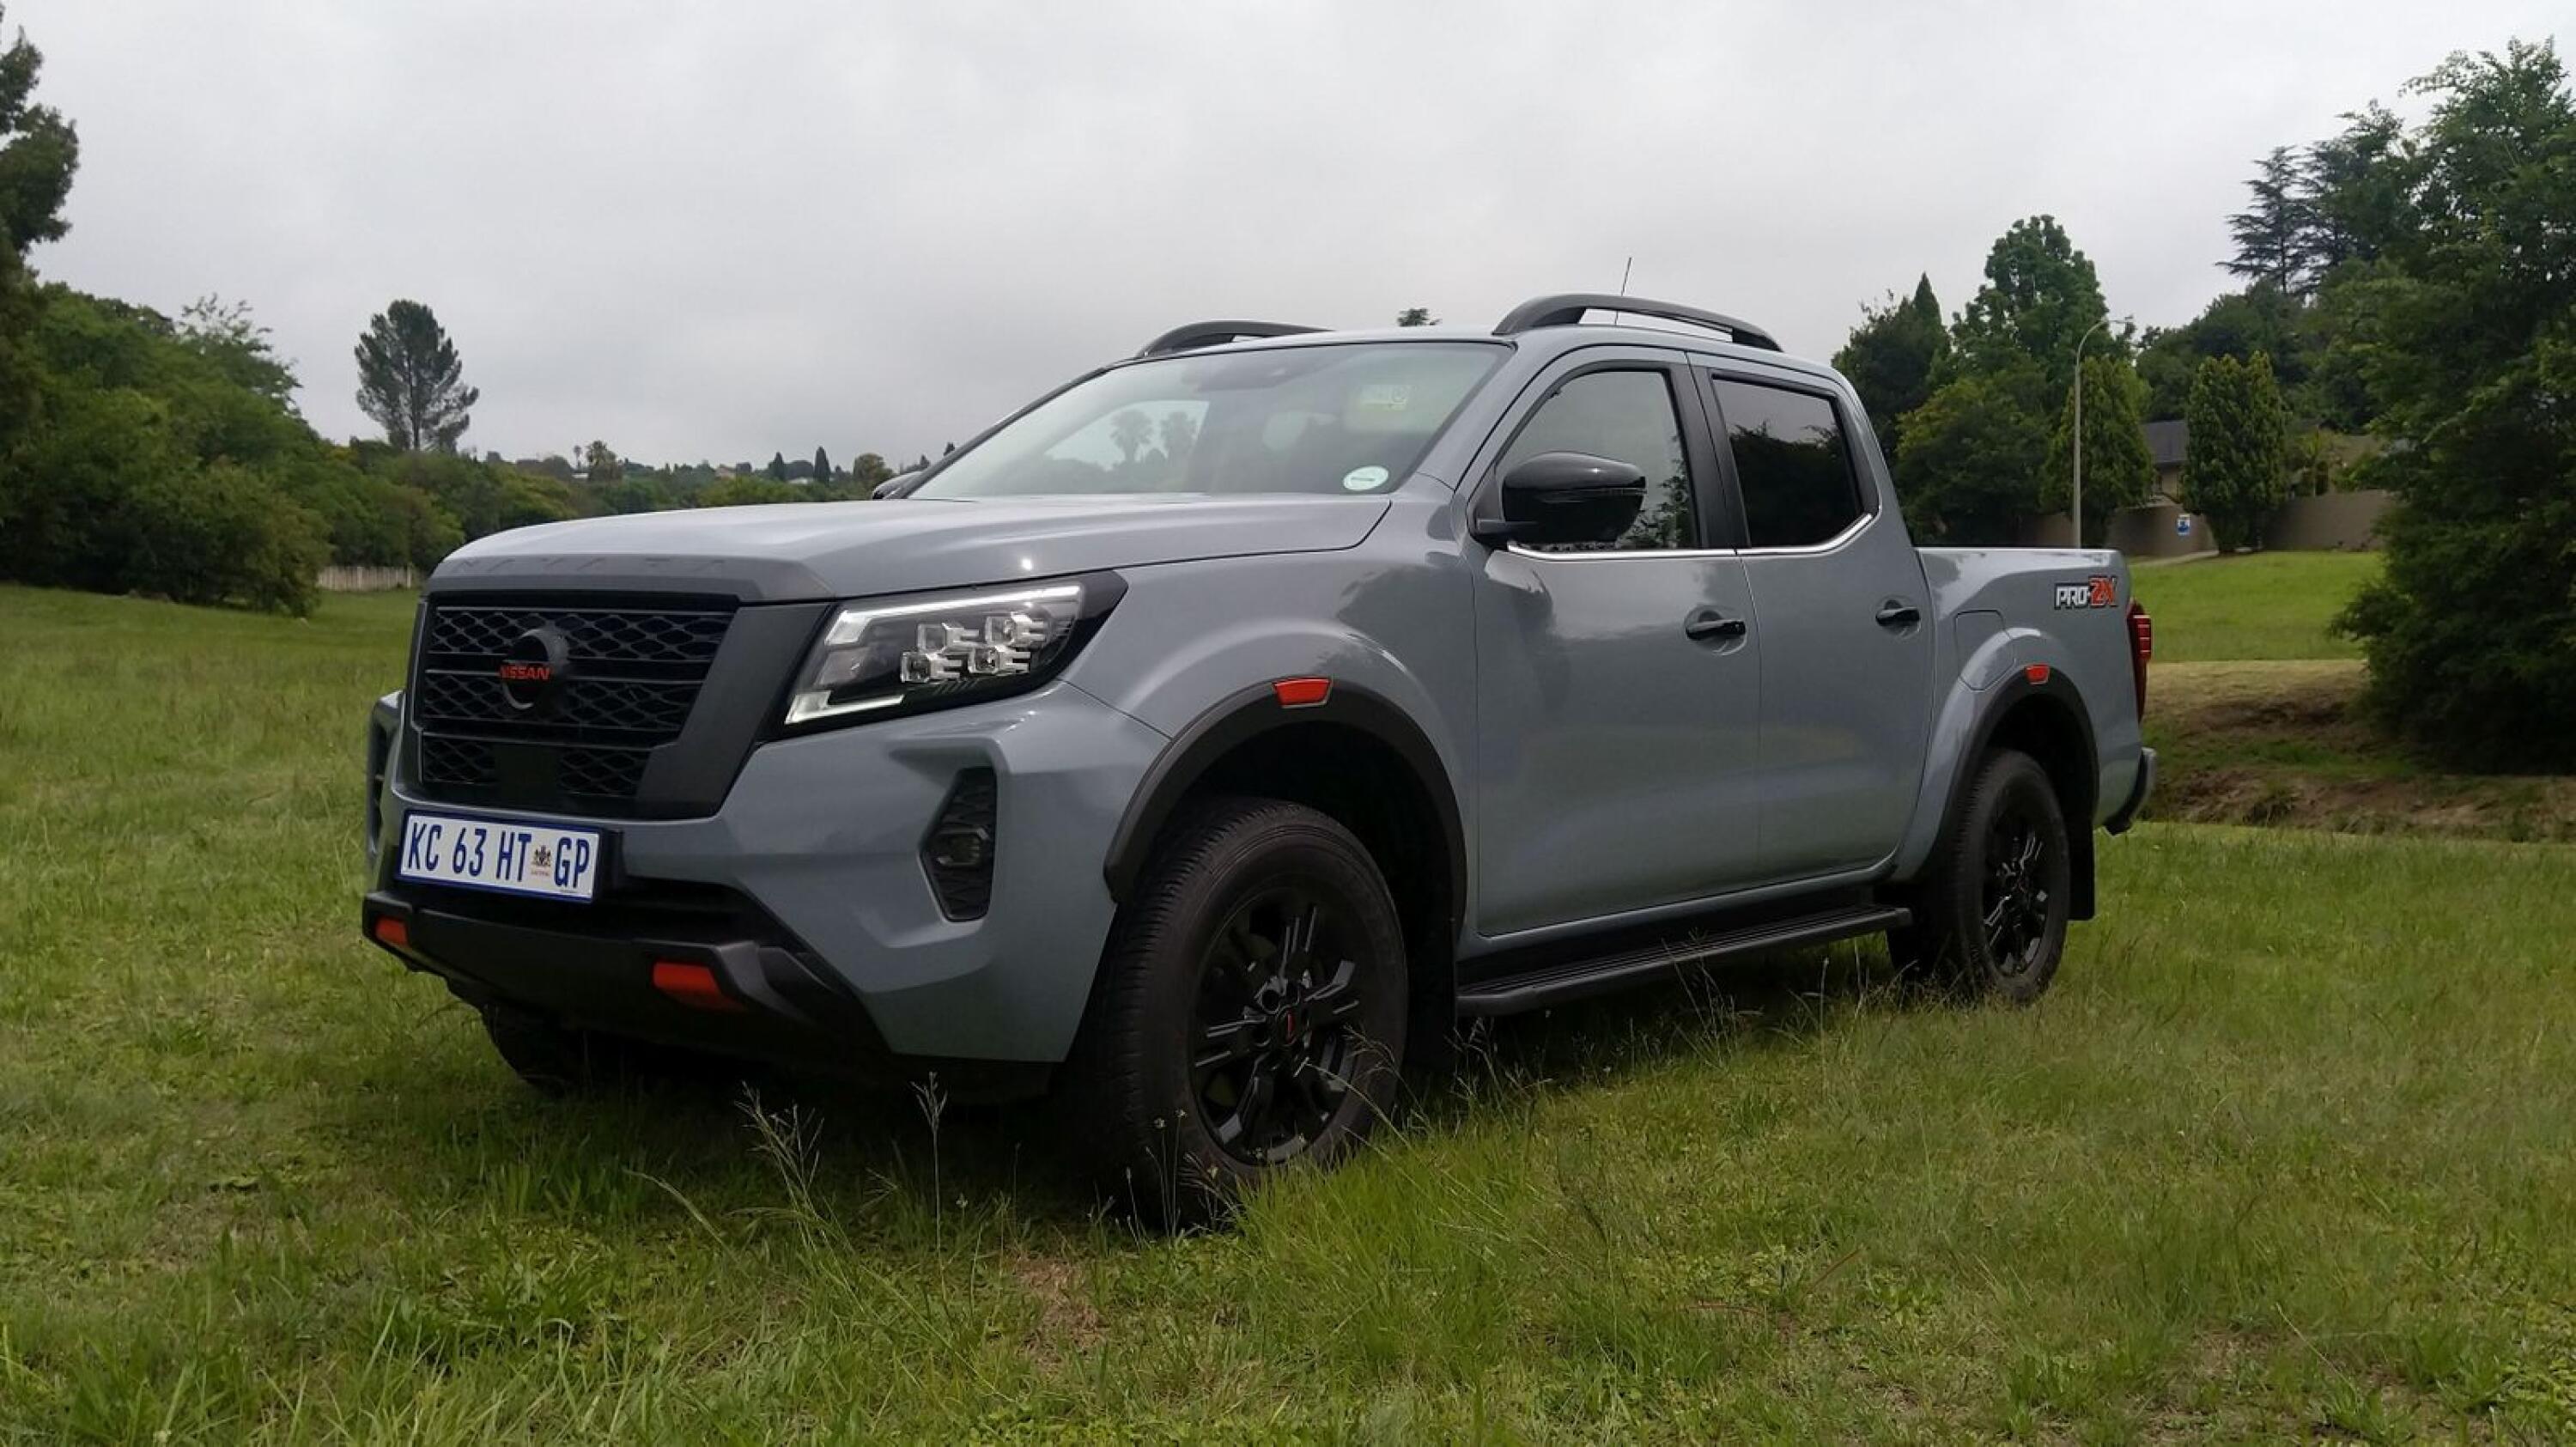 DRIVEN: Nissan Navara Pro-4X is a comfortable and well-appointed alternative  - DFA